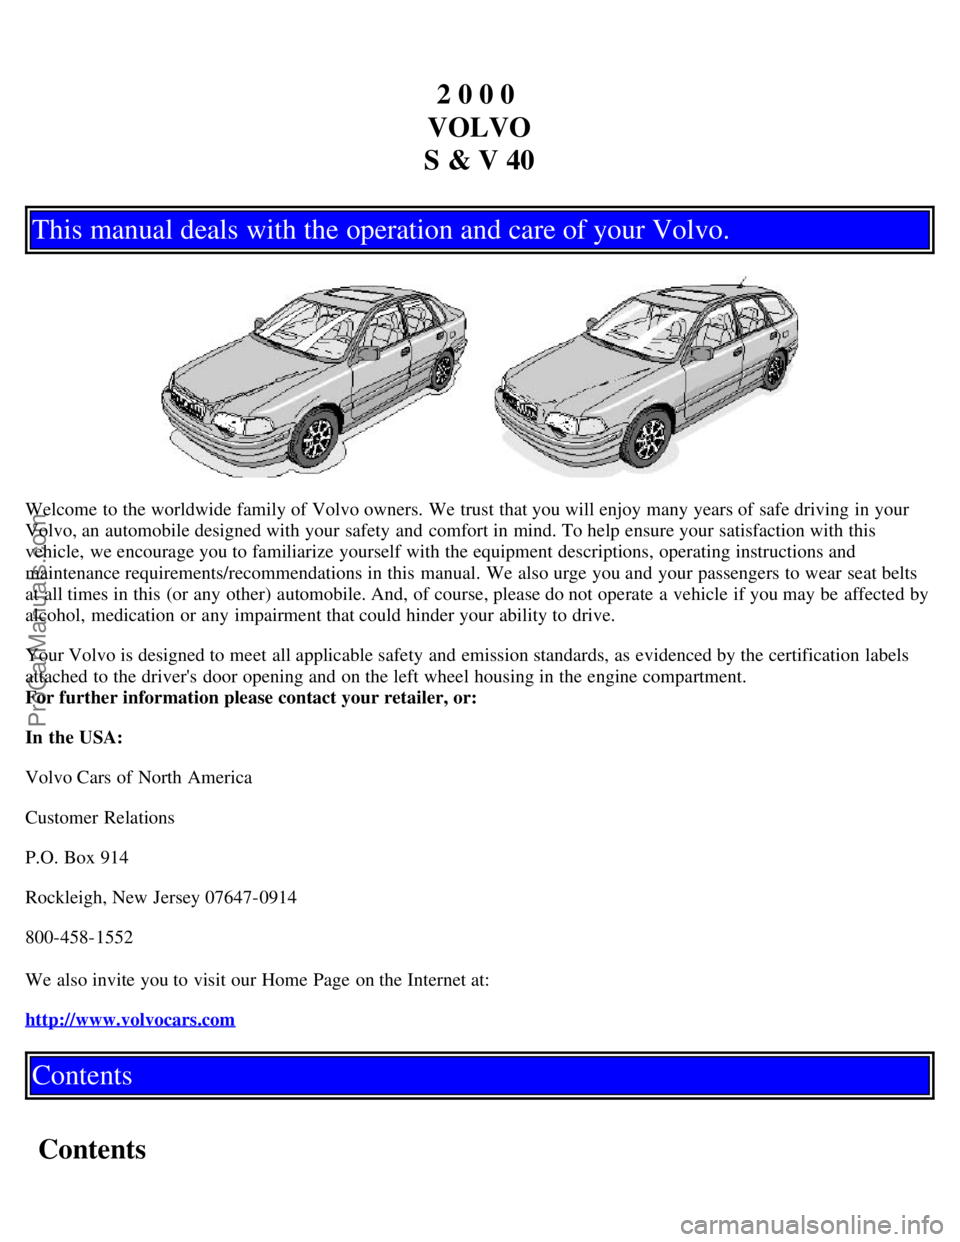 VOLVO S40 2000  Owners Manual 2 0 0 0 
VOLVO
S & V 40
This manual deals with the operation and care of your Volvo.
Welcome to the worldwide family of Volvo owners. We trust that you will enjoy many years of safe driving in your
Vo